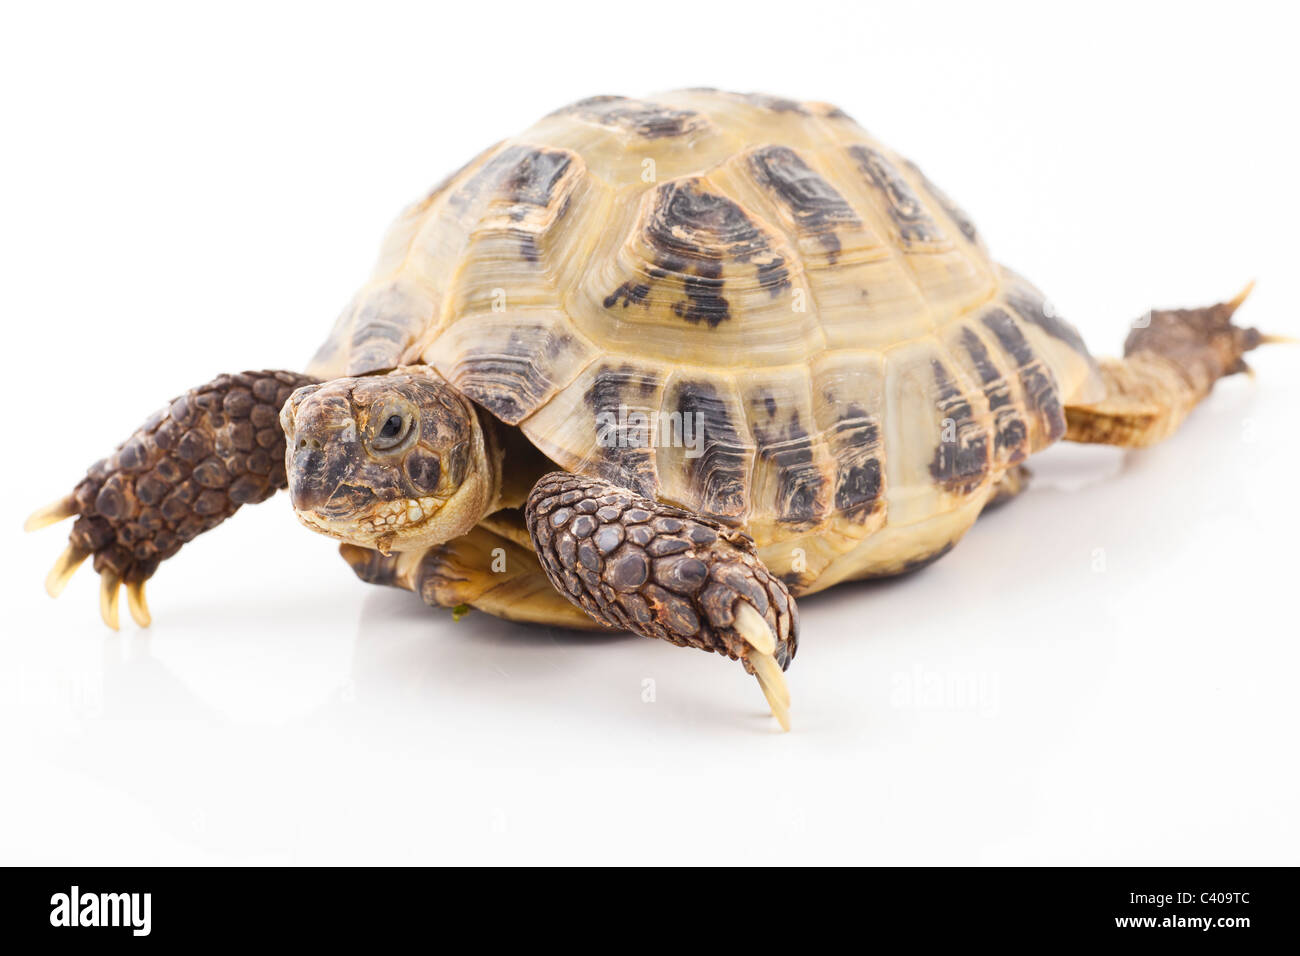 Russian tortoise on a white background, Focus is shallow Stock Photo